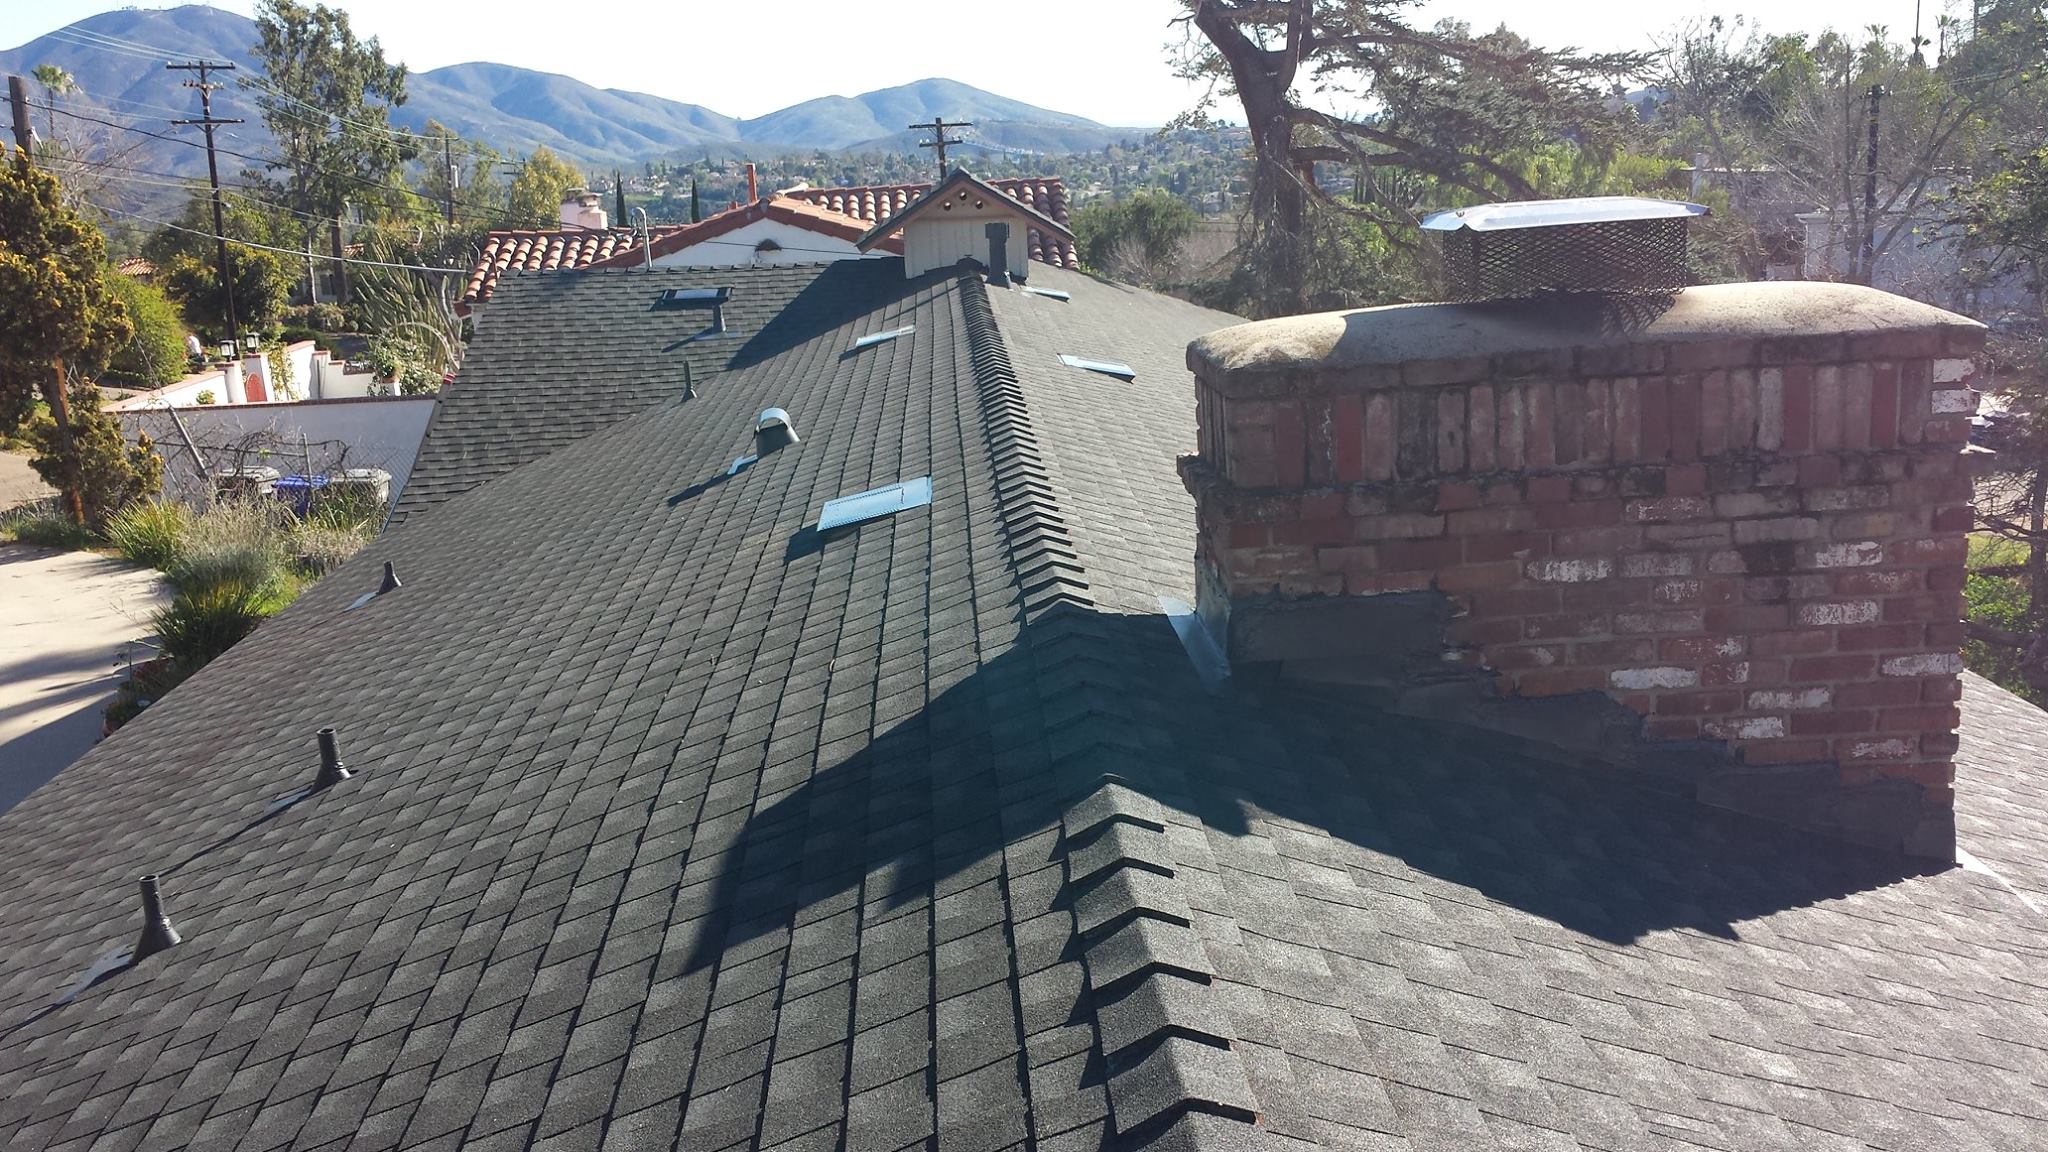 roofing16 > Reliable Roof Repairs For Residential Properties - San Diego's Affordable Roofer